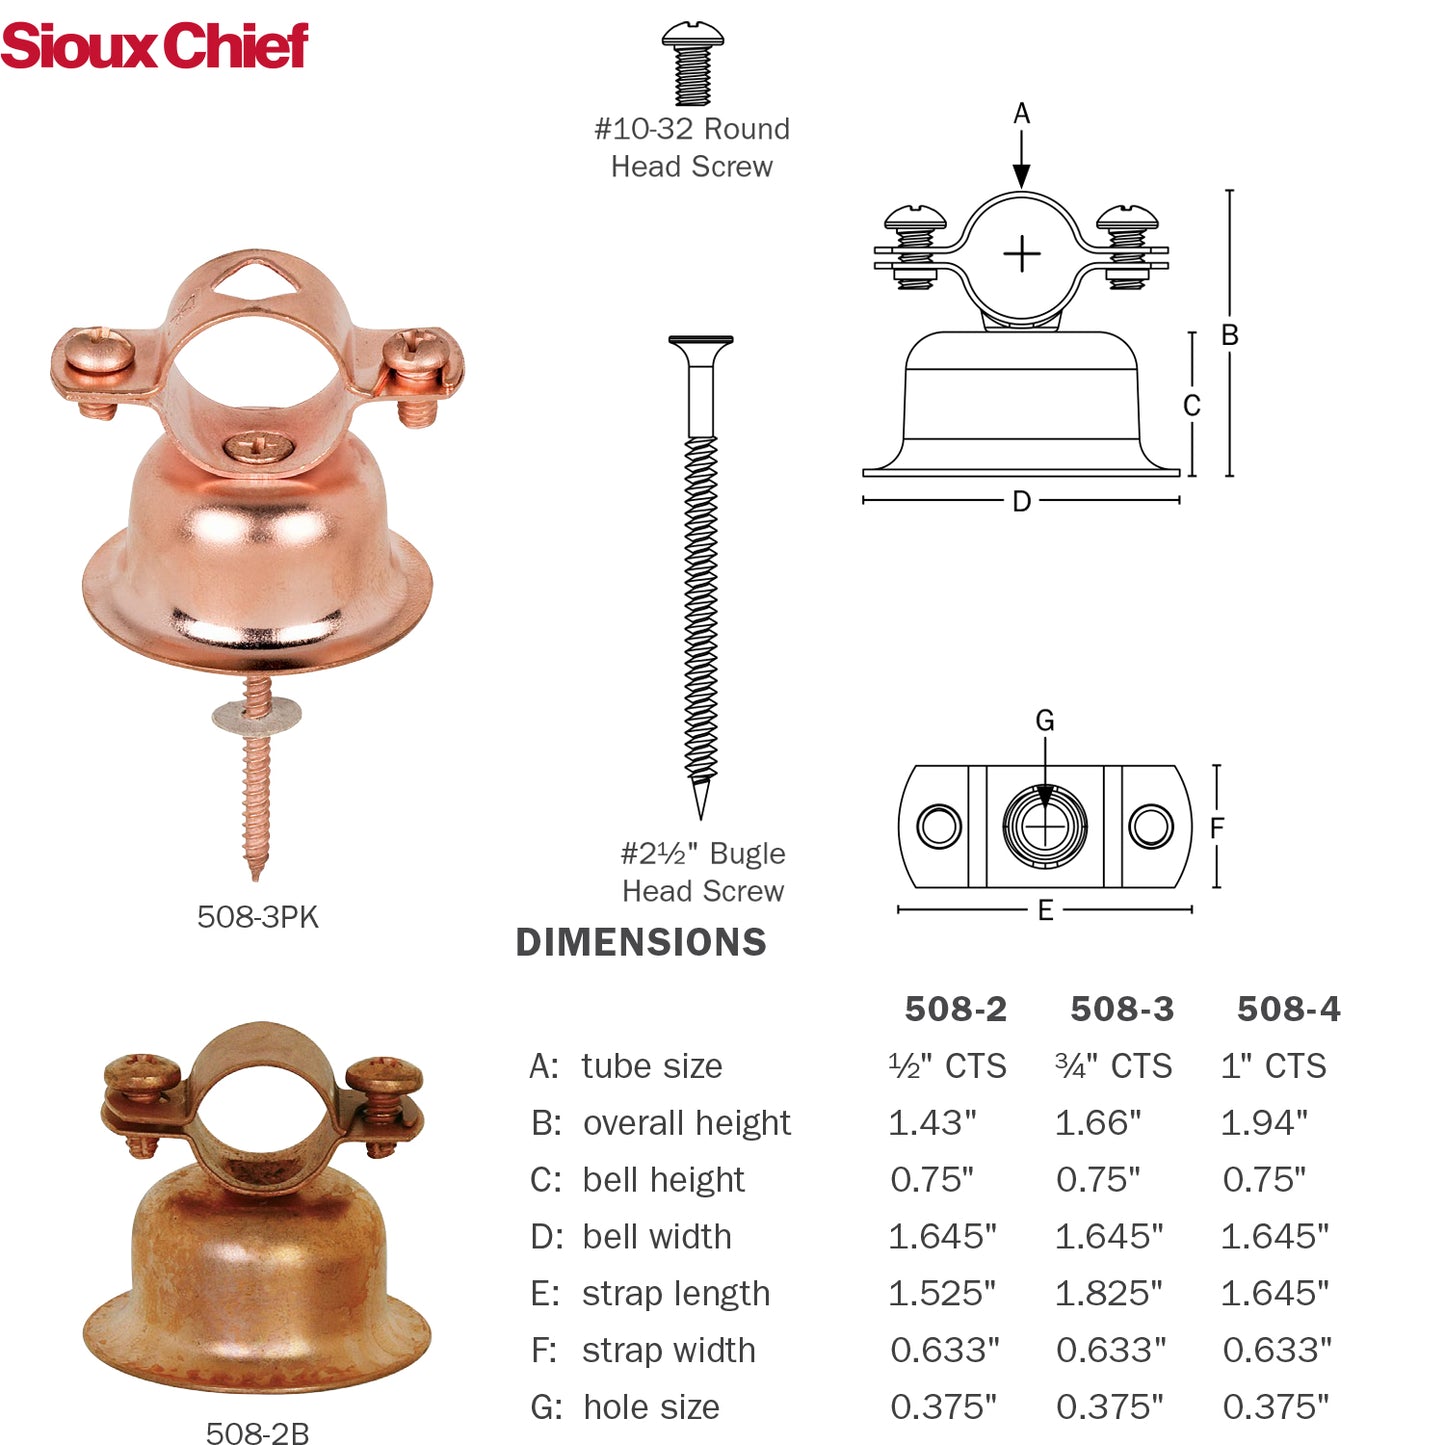 Sioux Chief 508-4 - 1" CTS Bell Hanger